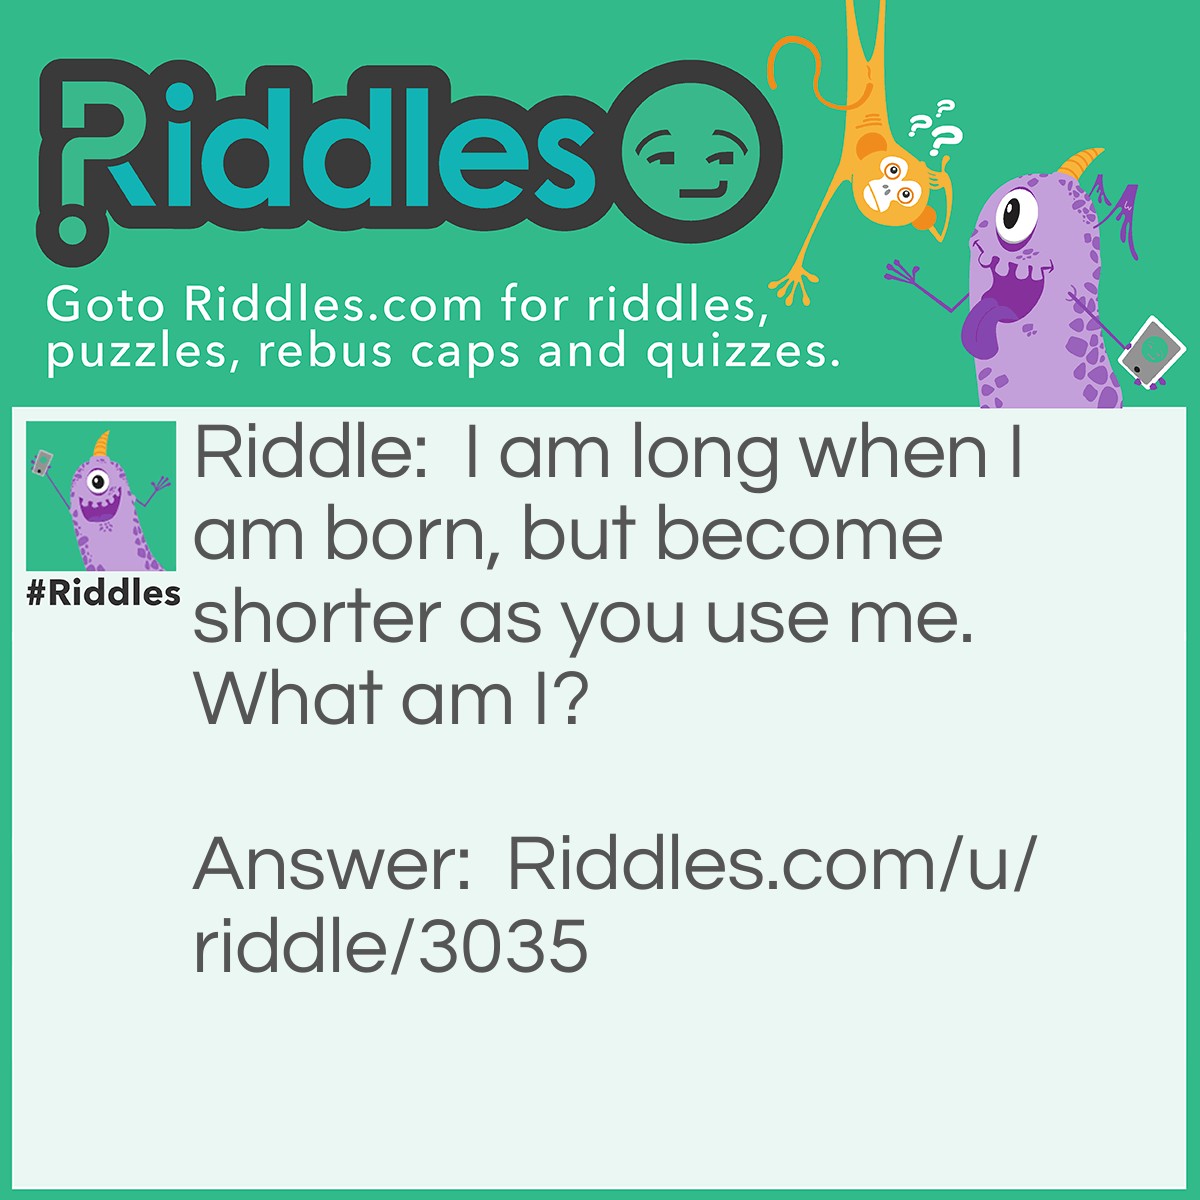 Riddle: I am long when I am born, but become shorter as you use me. What am I? Answer: A pencil.